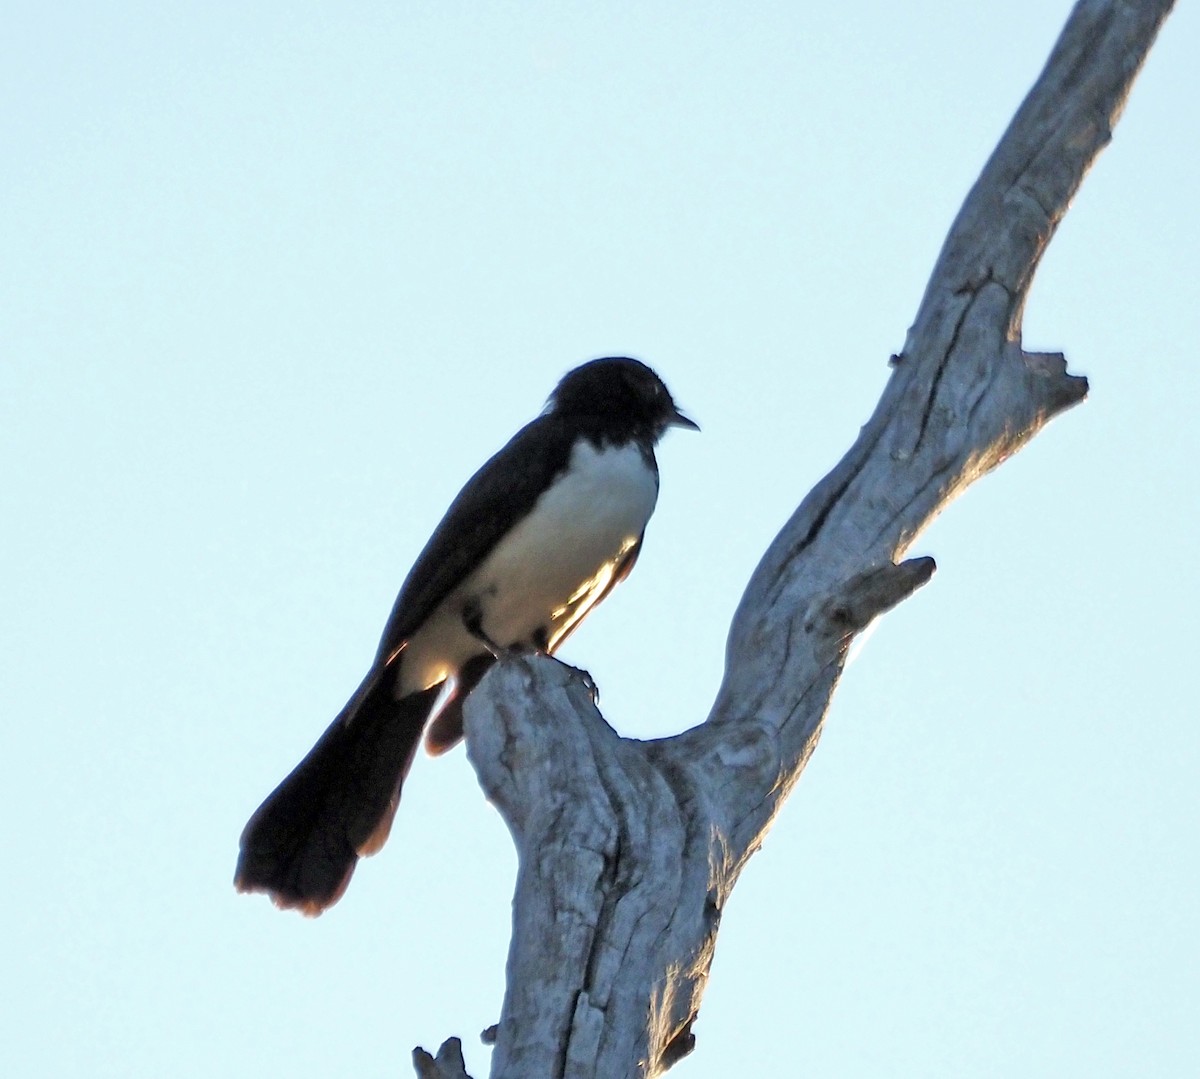 Willie-wagtail - Steve Law